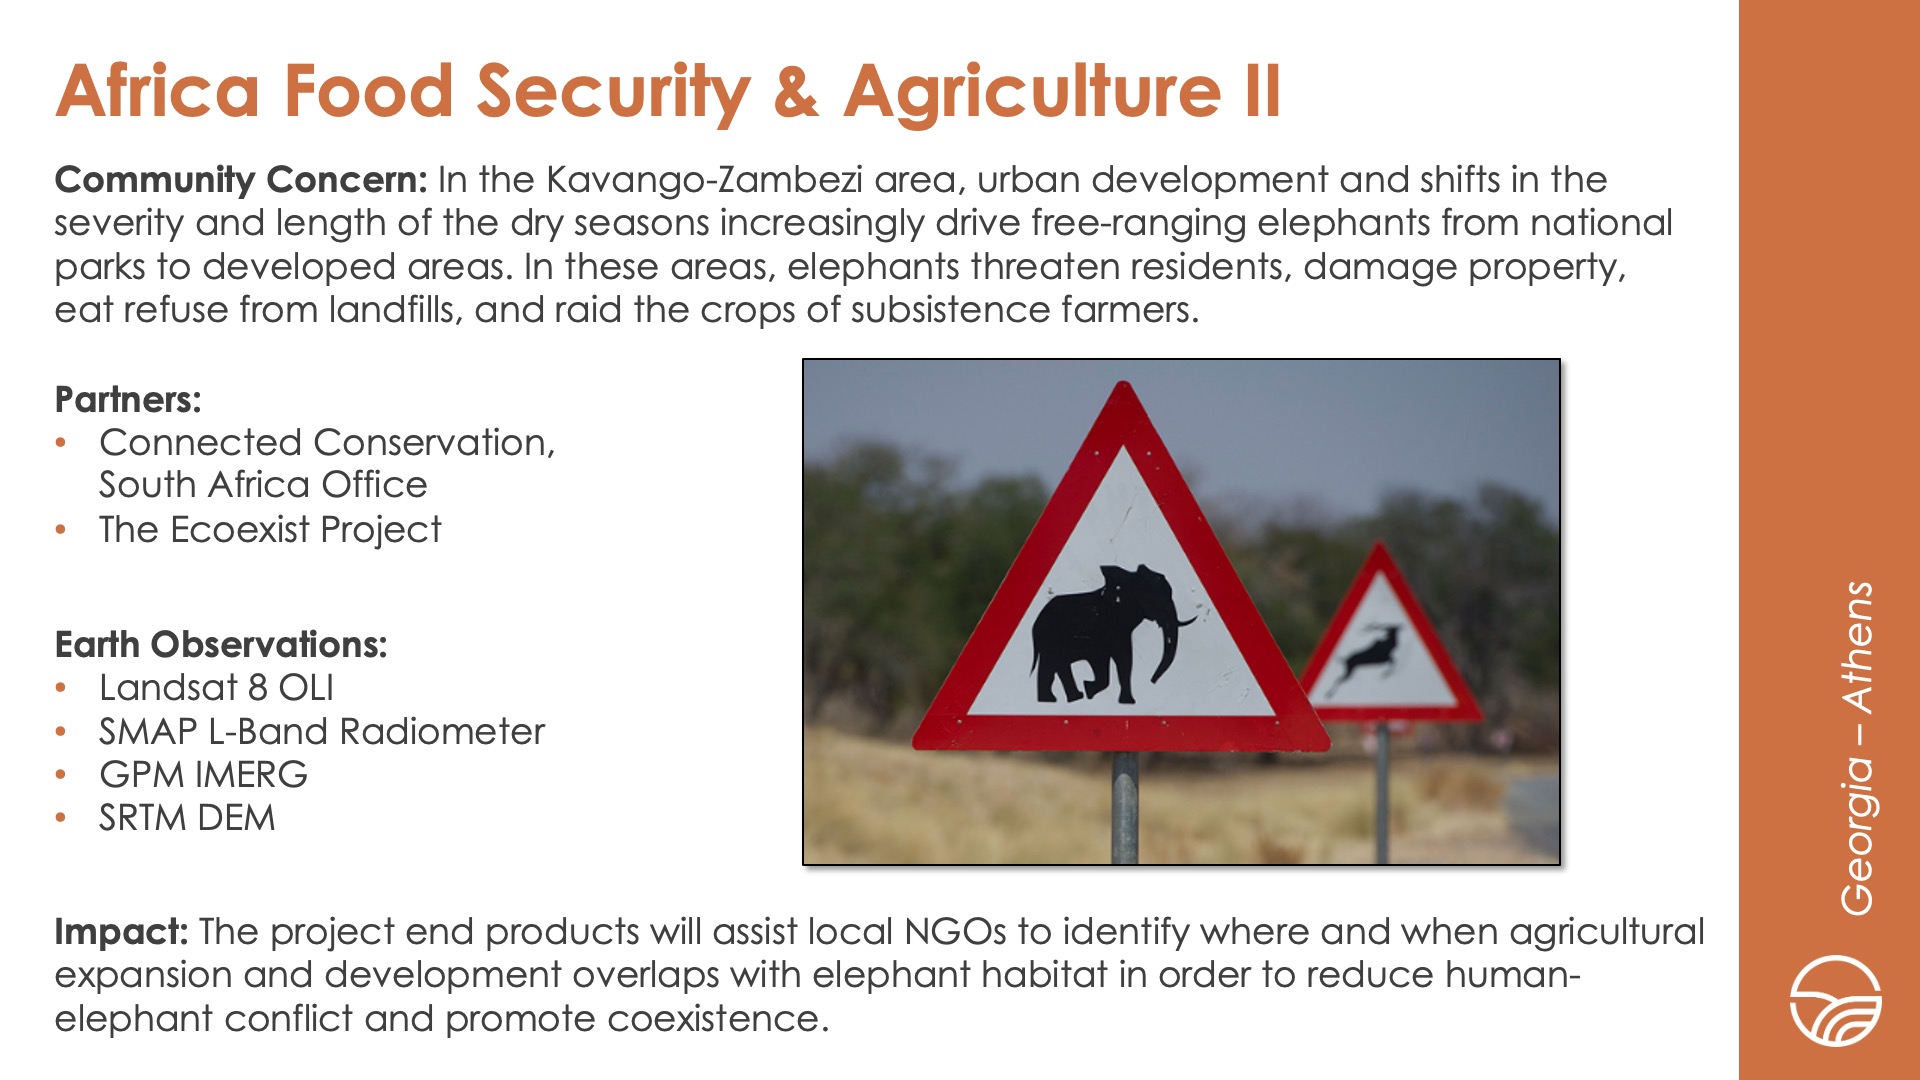 Slide title: Africa Food Security & Agriculture IIDEVELOP Node: Georgia - AthensCommunity Concern: In the Kavango-Zambezi area, urban development and shifts in the severity and length of the dry seasons increasingly drive free-ranging elephants from national parks to developed areas. In these areas, elephants threaten residents, damage property, eat refuse from landfills, and raid the crops of subsistence farmers.Impact: The project end products will assist local NGOs to identify where and when agricultural expansion and development overlaps with elephant habitat in order to reduce human-elephant conflict and promote coexistence.Partners: Connected Conservation, South Africa Office, The Ecoexist ProjectEarth Observations: Landsat 8 OLI, SMAP L-Band Radiometer, GPM IMERG, SRTM DEM